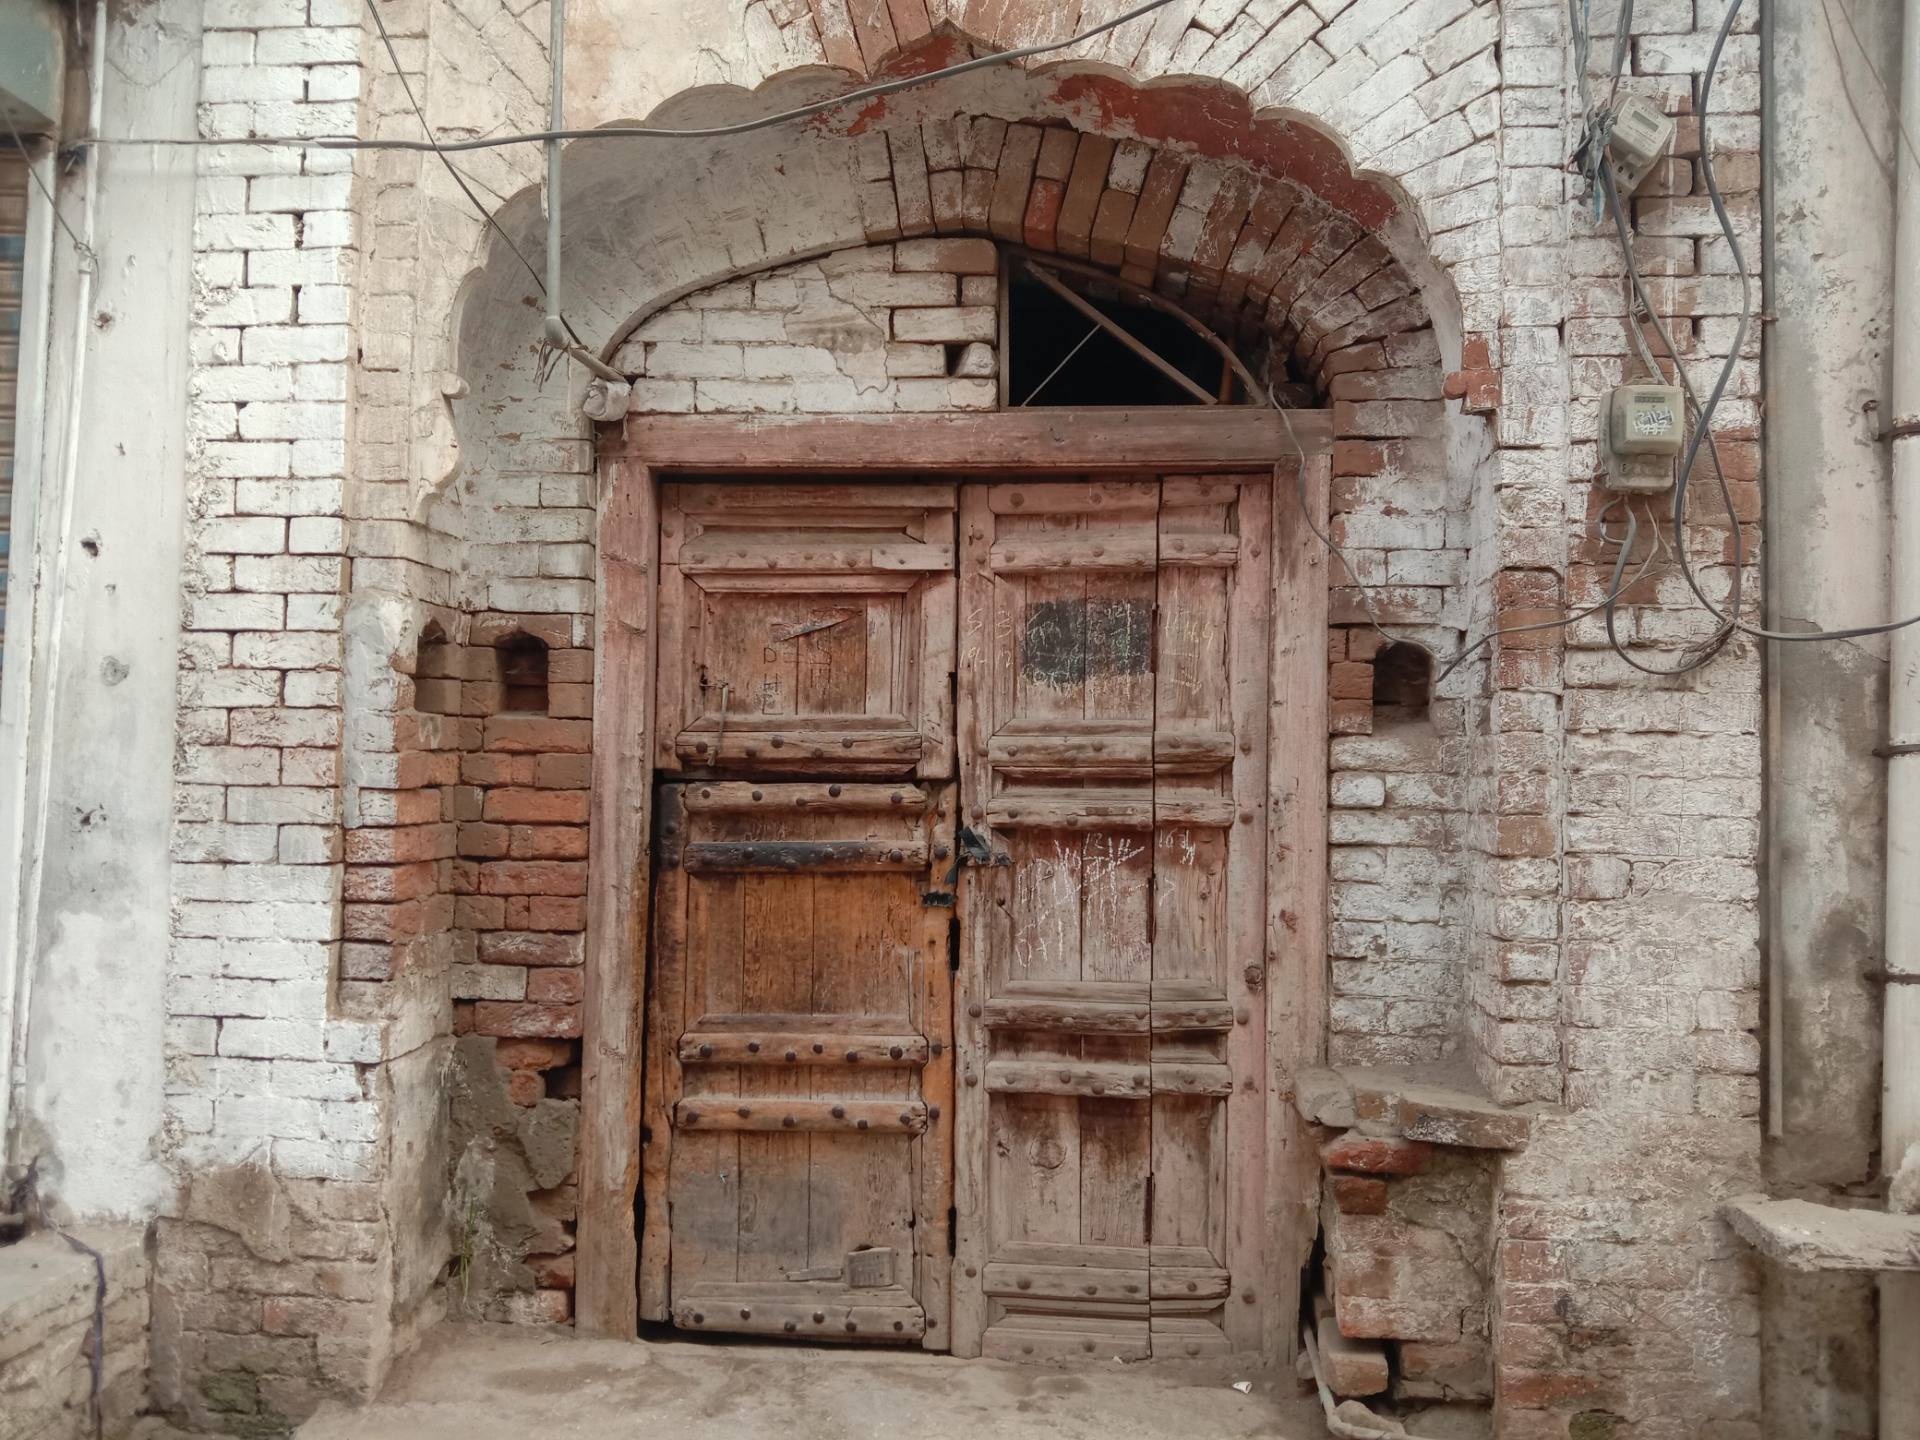 roaming the historic narrow streets of the Mianwali district